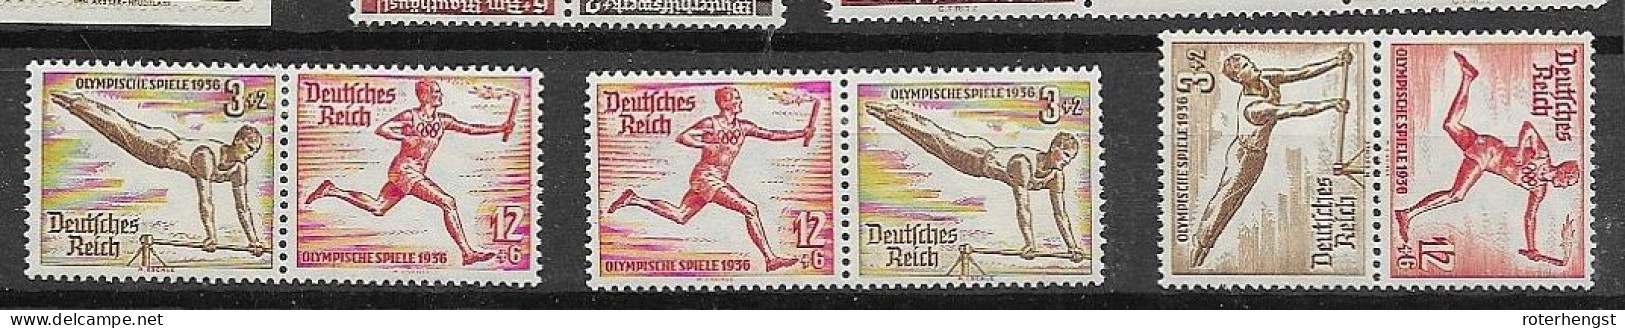 Reich From Booklet Panes 1936 Mlh *  And Mnh ** (right Better Pair) 44 Euros - Libretti